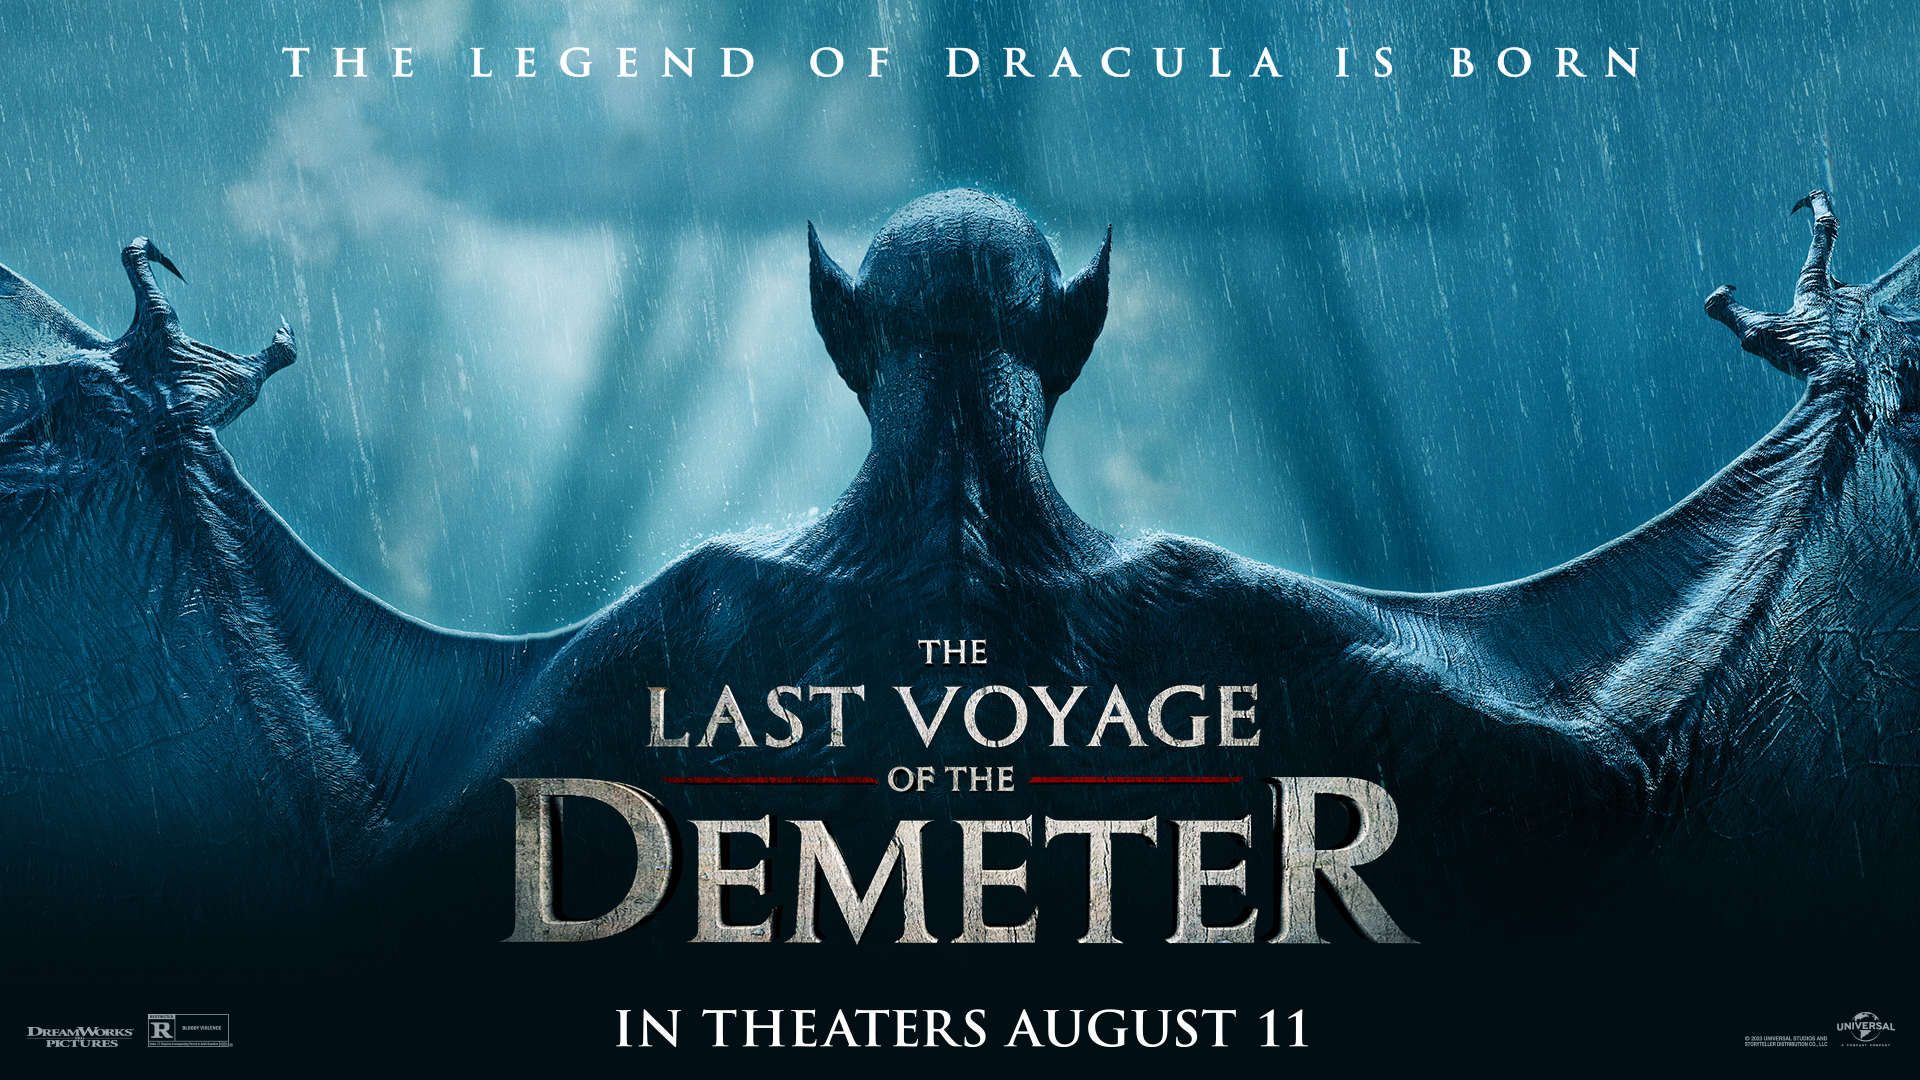 🔒 Enter to win an early screening of 'THE LAST VOYAGE OF THE DEMETER